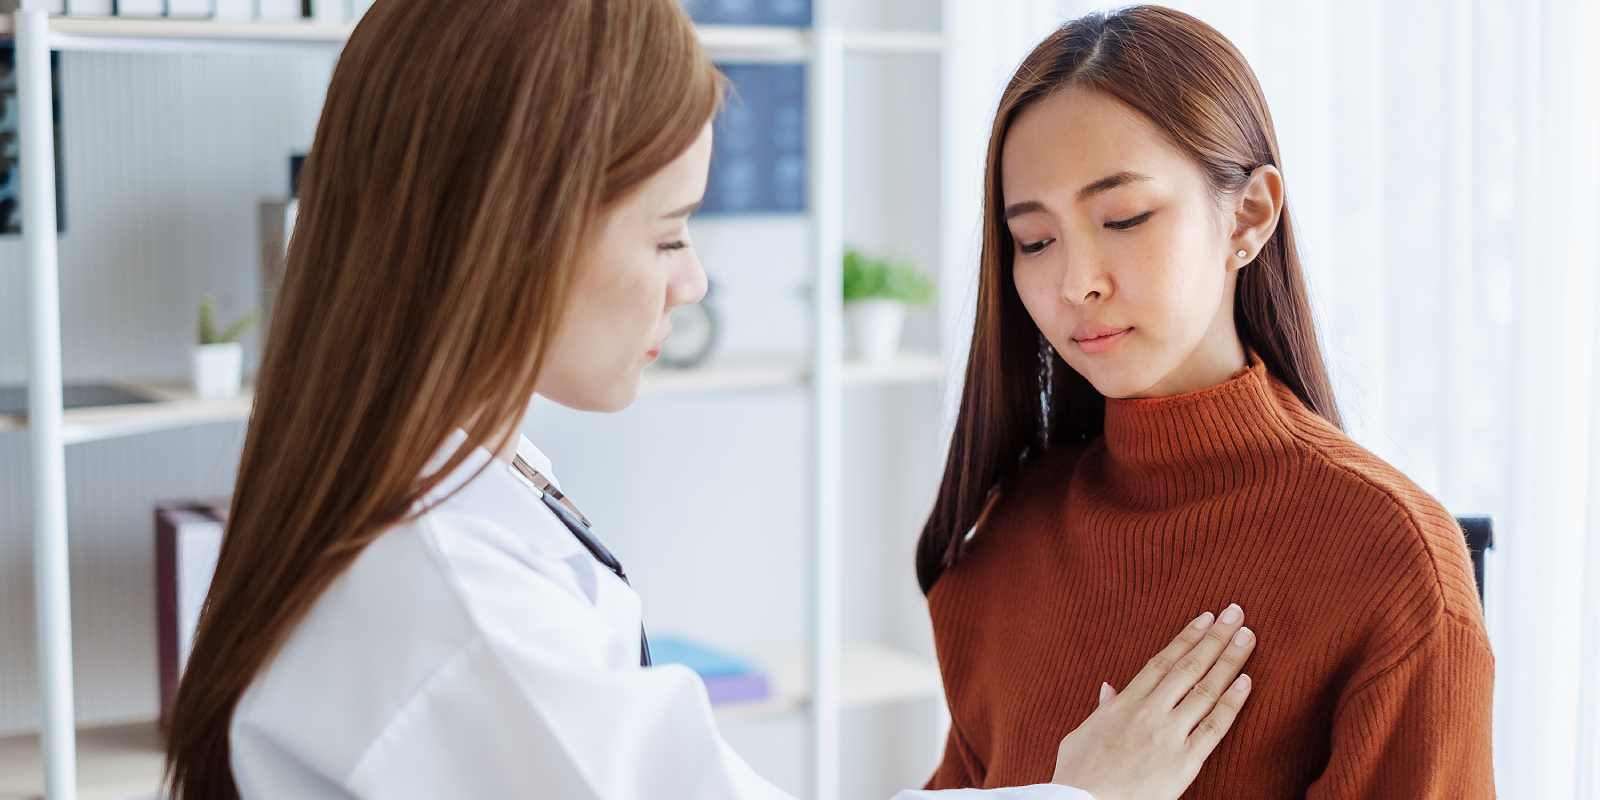 Doctor examining Breast health a woman